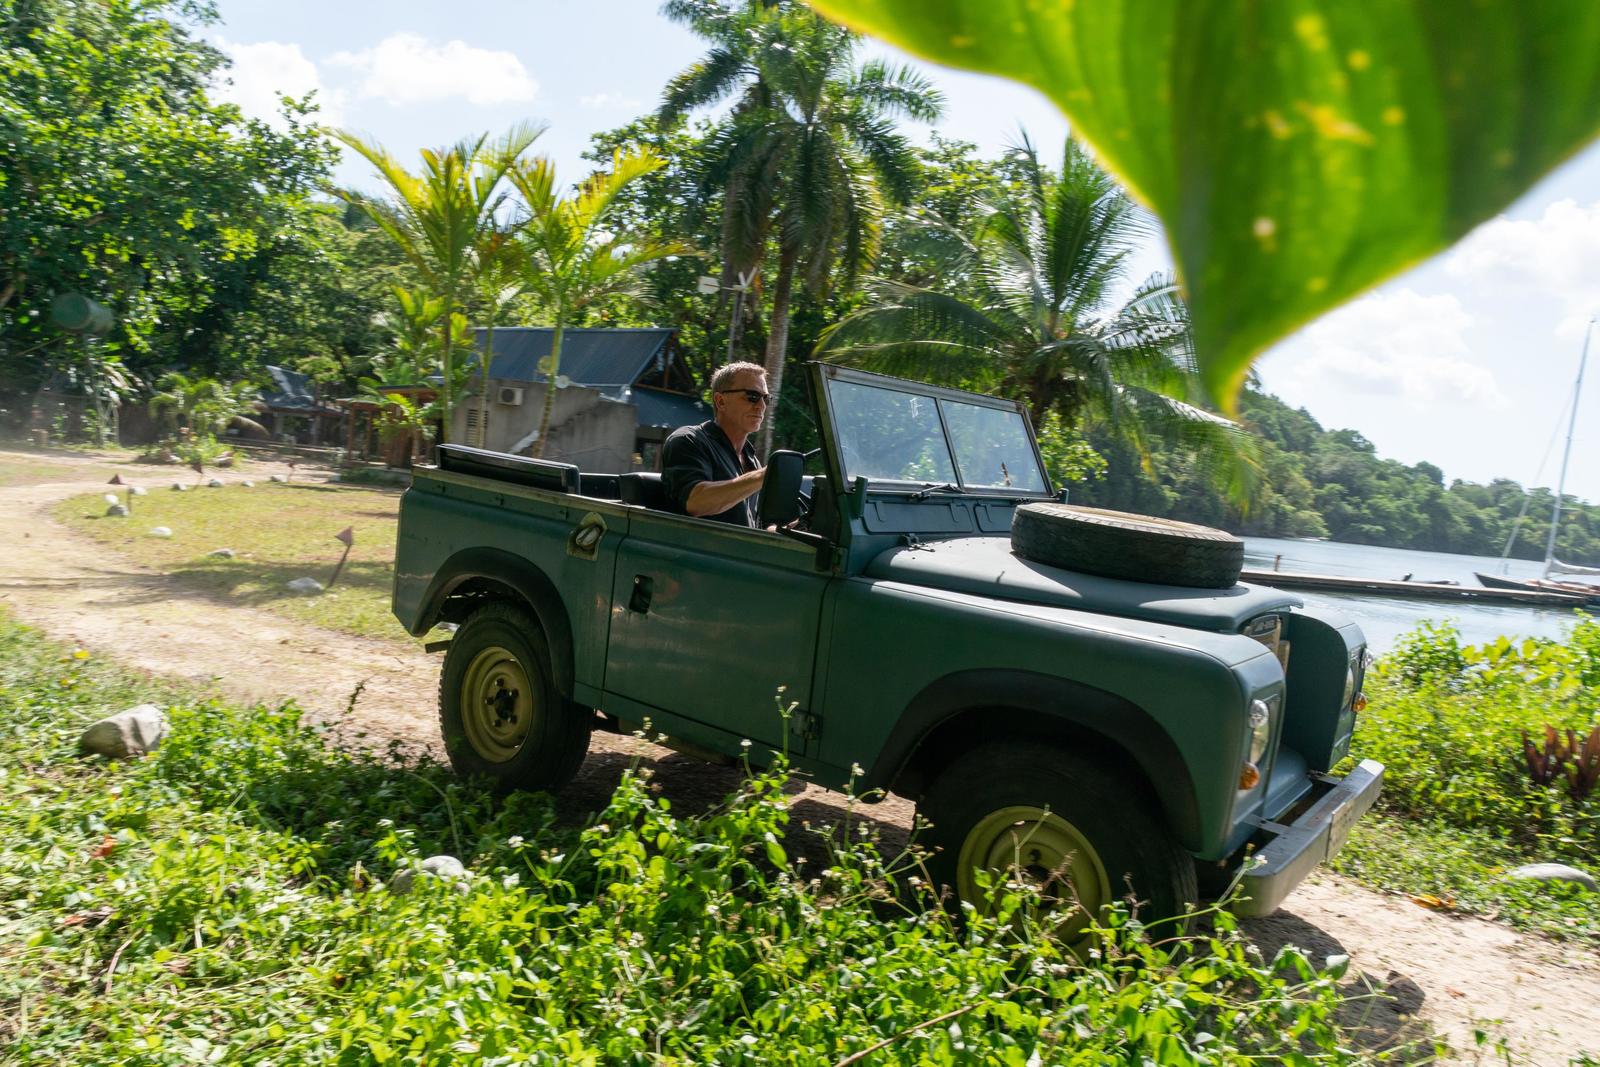 3. James Bond in his Land Rover Series III in Jamaica